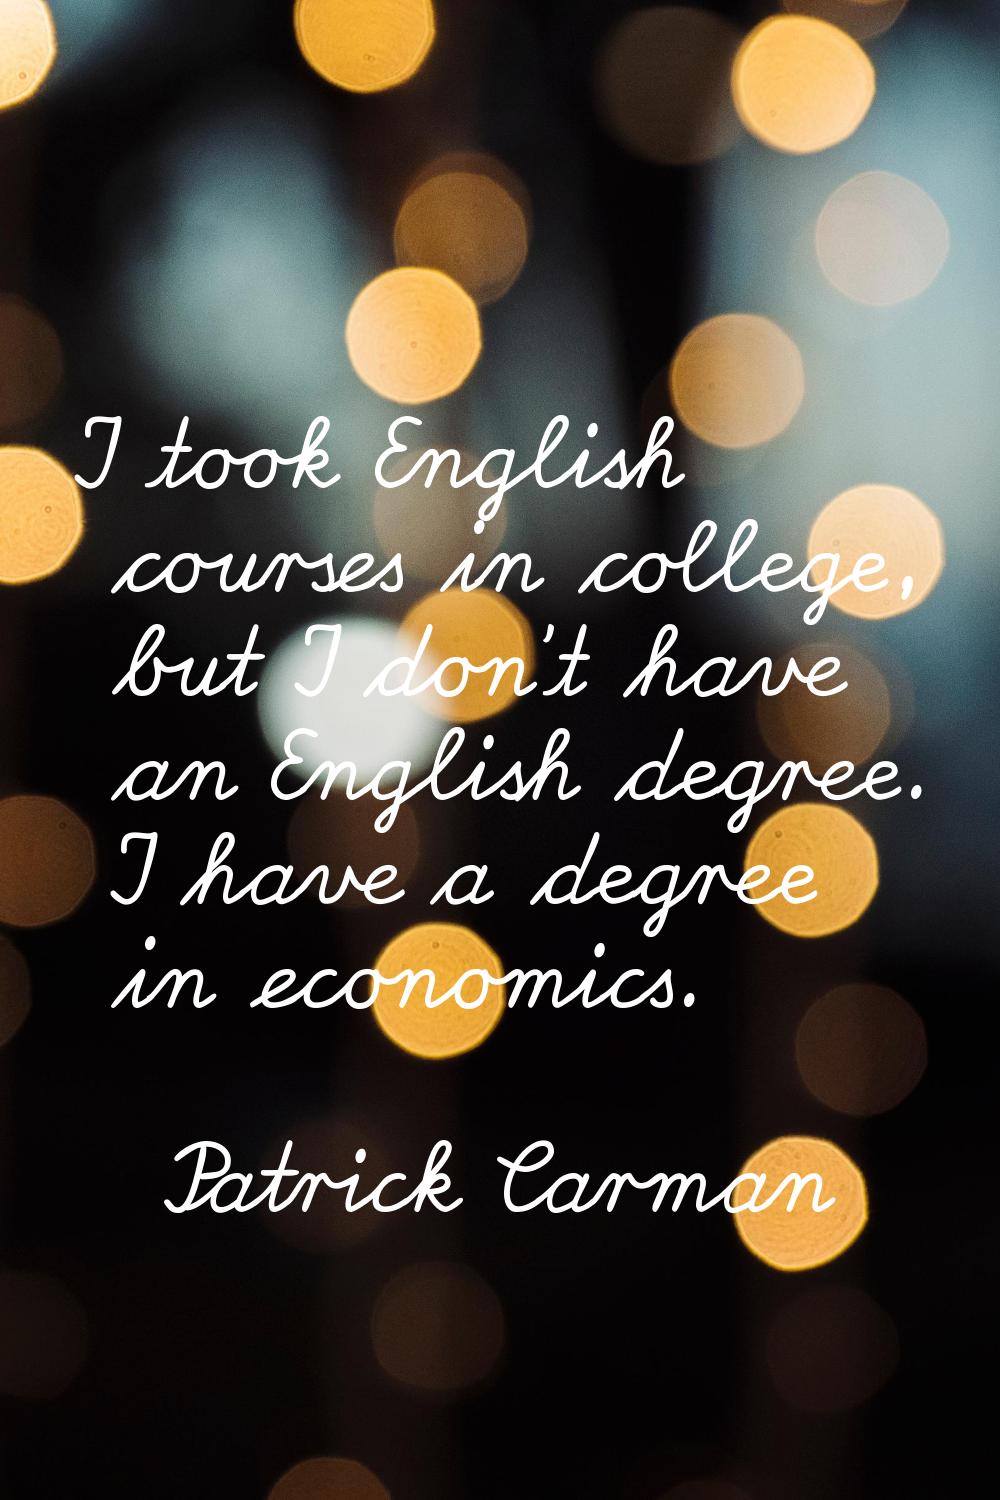 I took English courses in college, but I don't have an English degree. I have a degree in economics